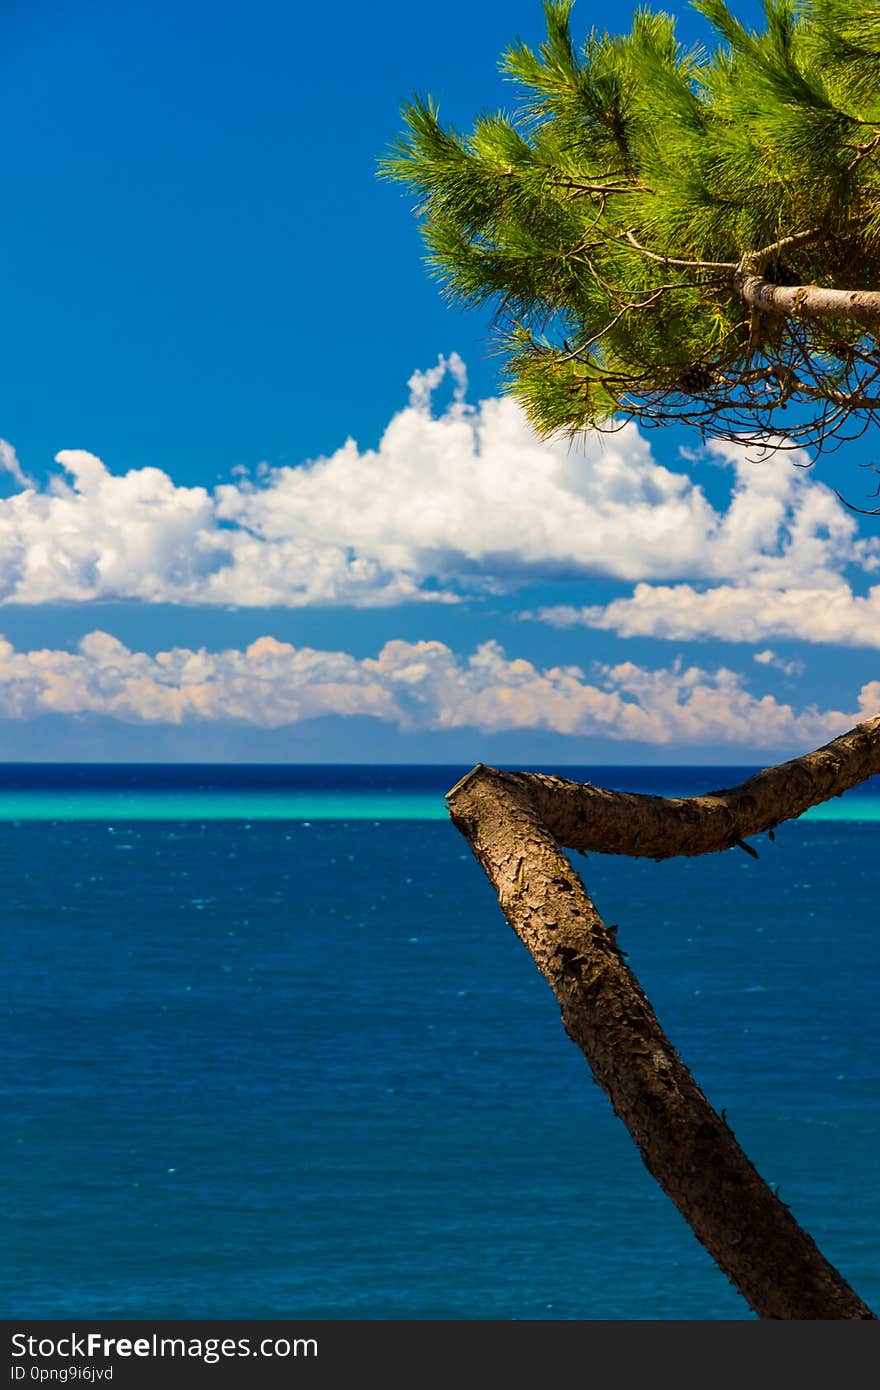 Tropical-like sea and sky in Italy in summer. Tropical-like sea and sky in Italy in summer